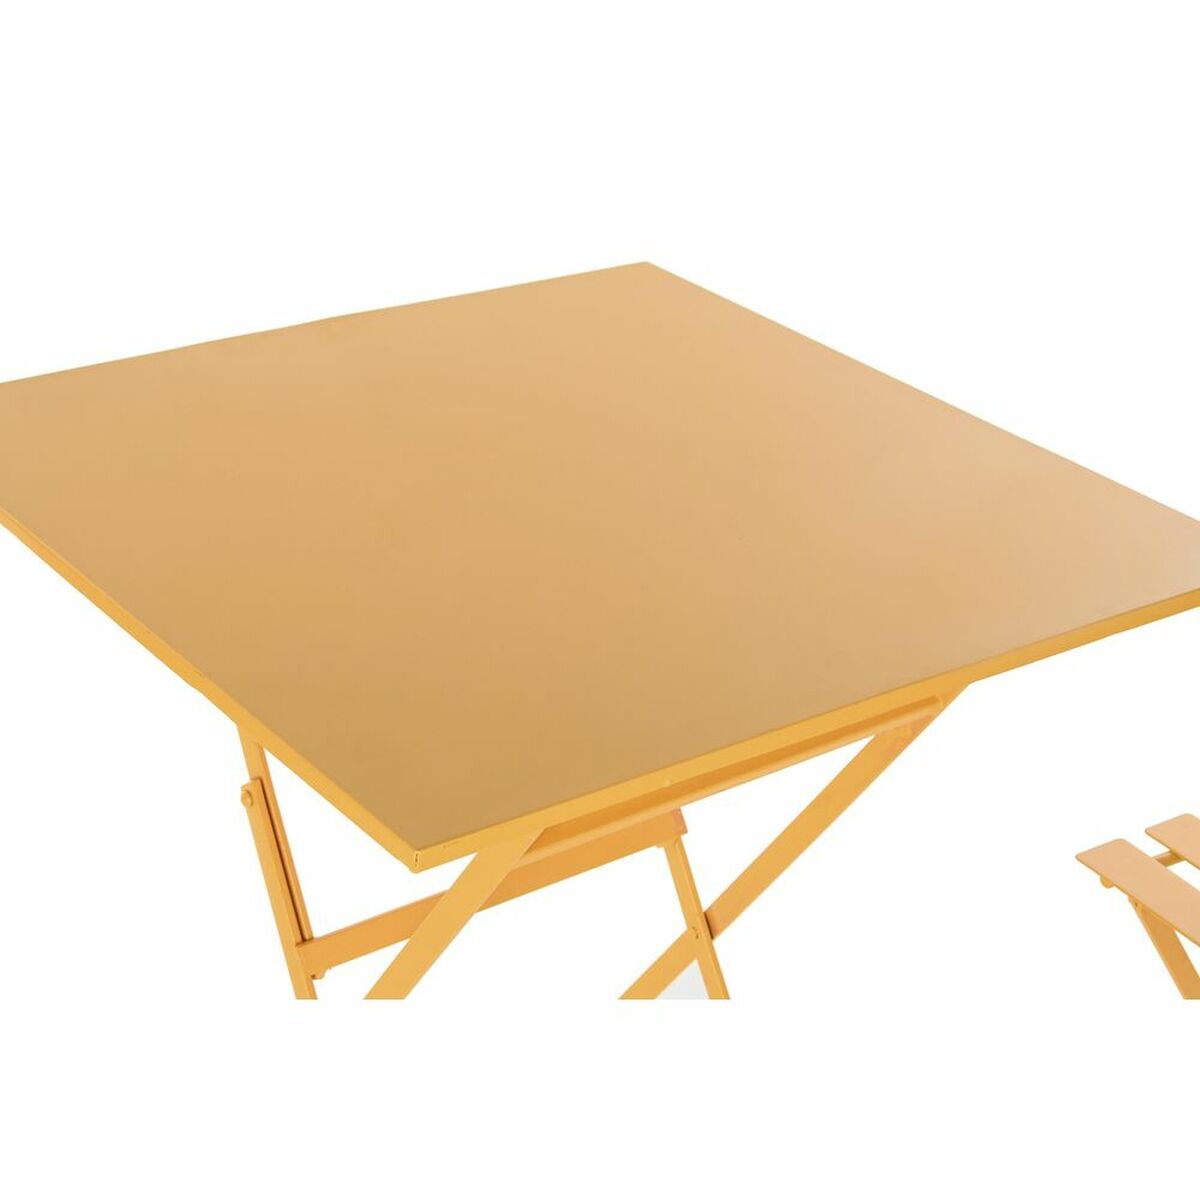 Table set with 2 chairs DKD Home Decor Mustard Metal (60 x 60 x 75 cm)  